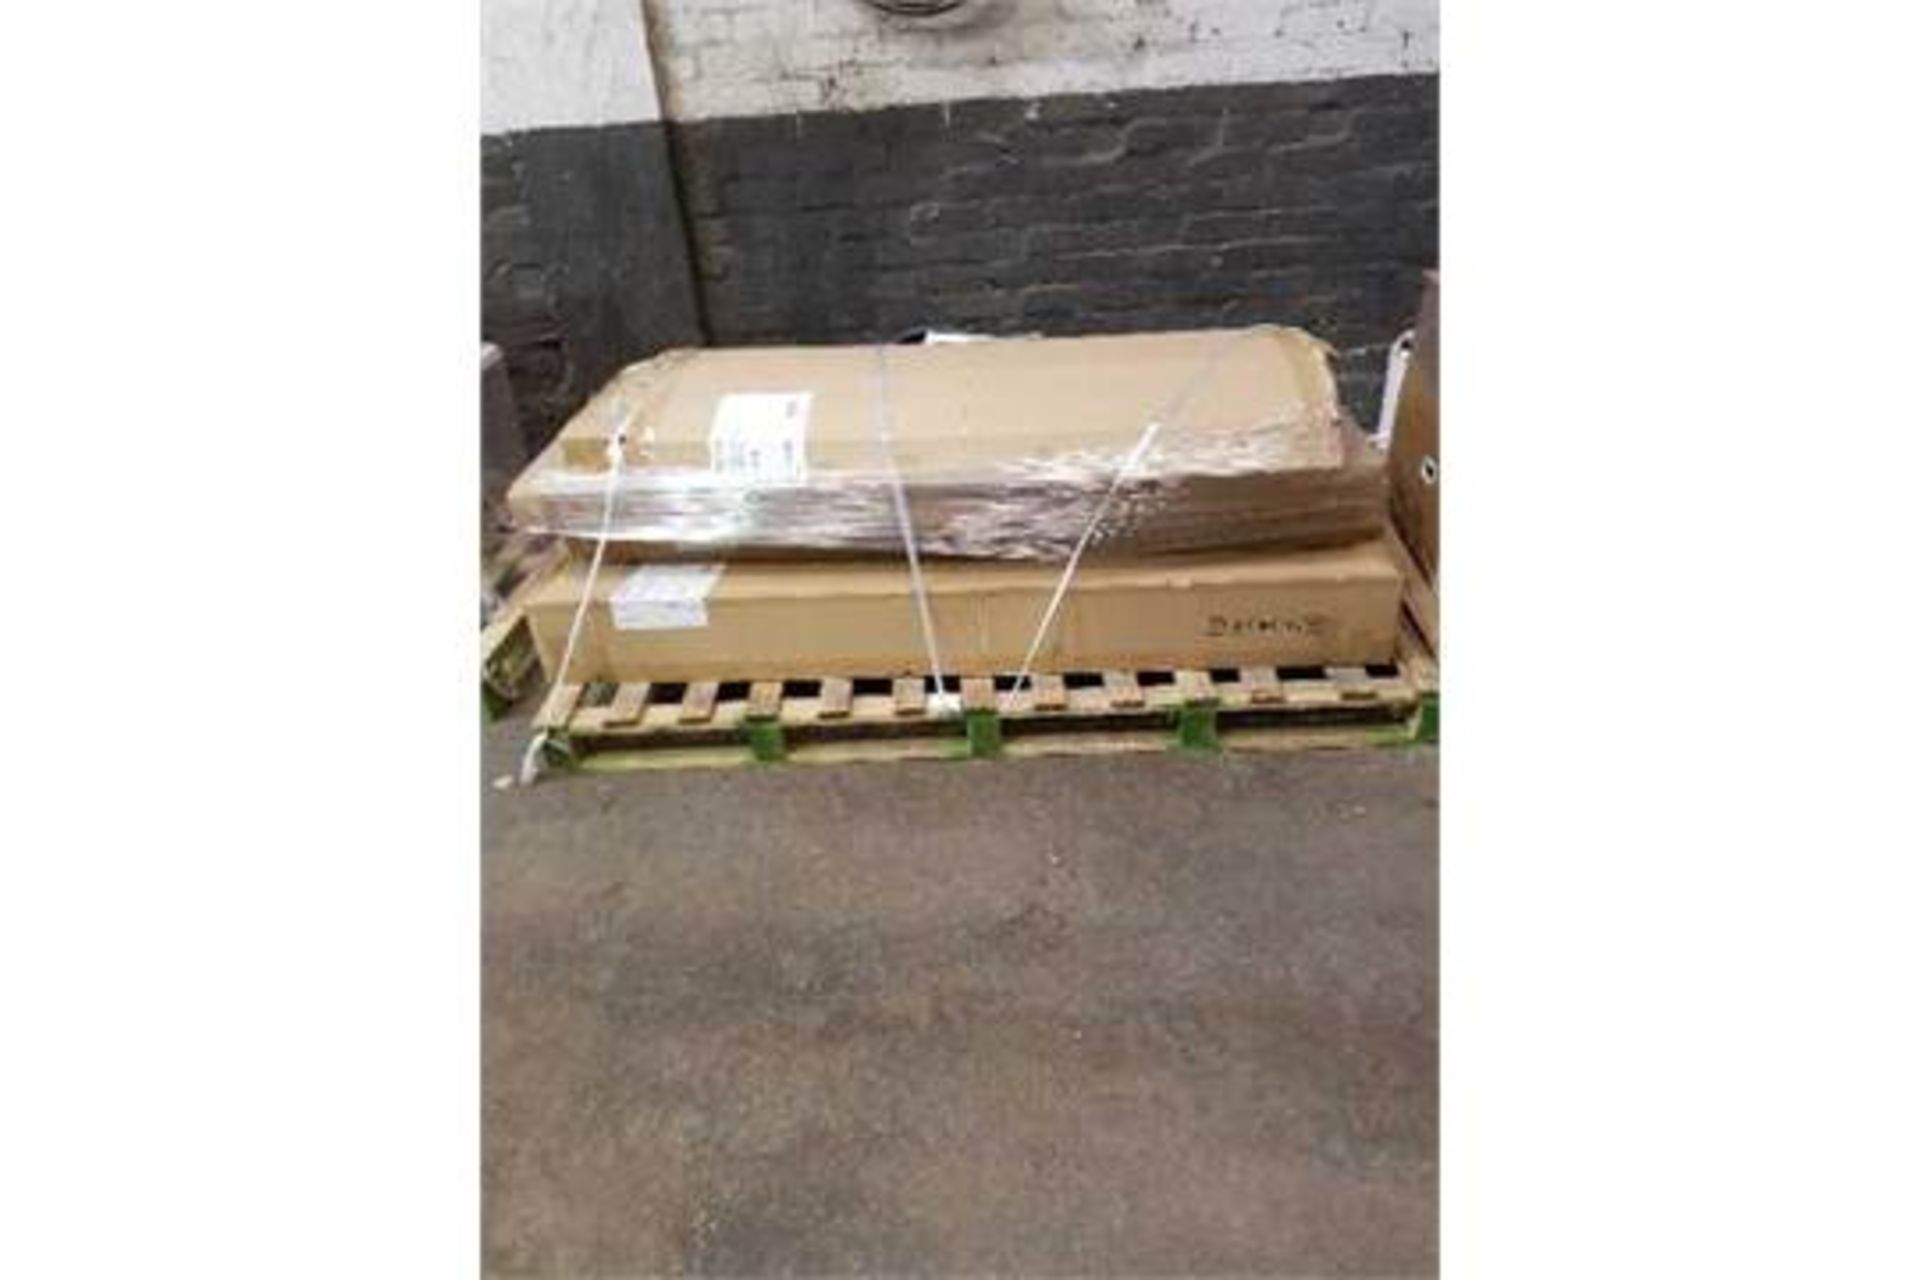 **NEW LOW RESERVE**Full Wagon of Bathroom stock from large online retailer which includes 17 pallets